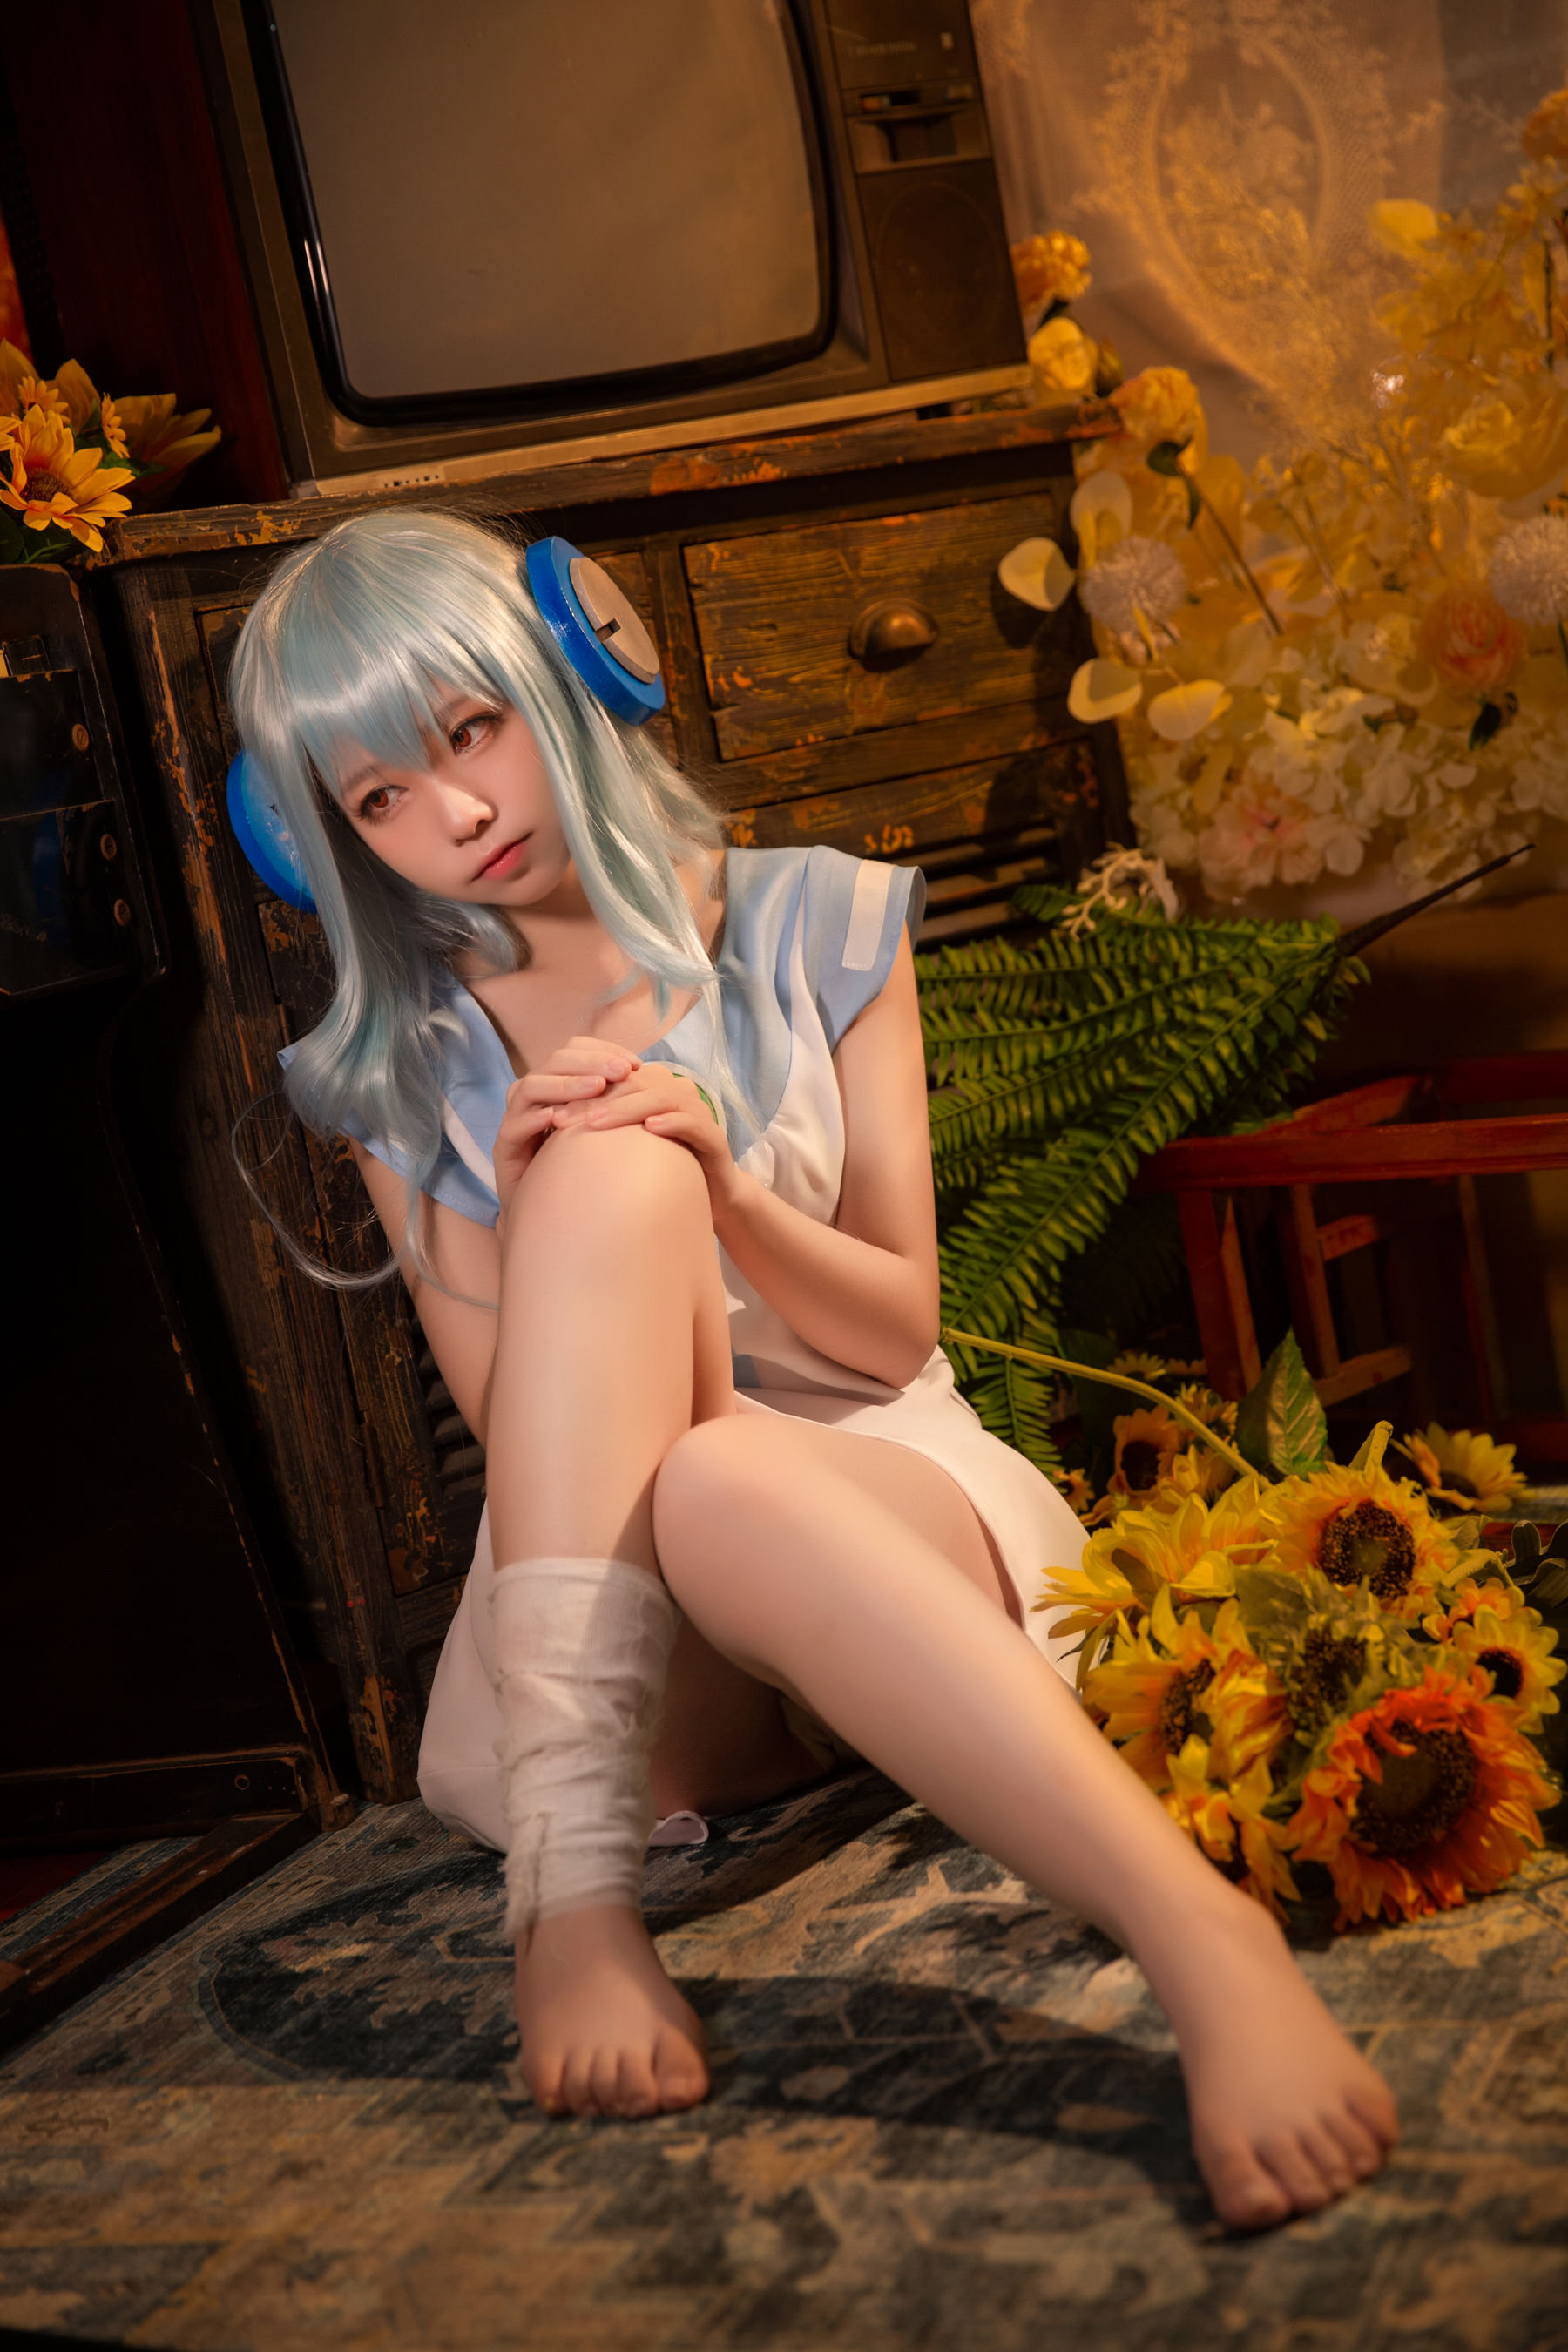 [Net Red COSER Photo] Anime blogger G44 will not be hurt - Music Box Page 5 No.332b2f